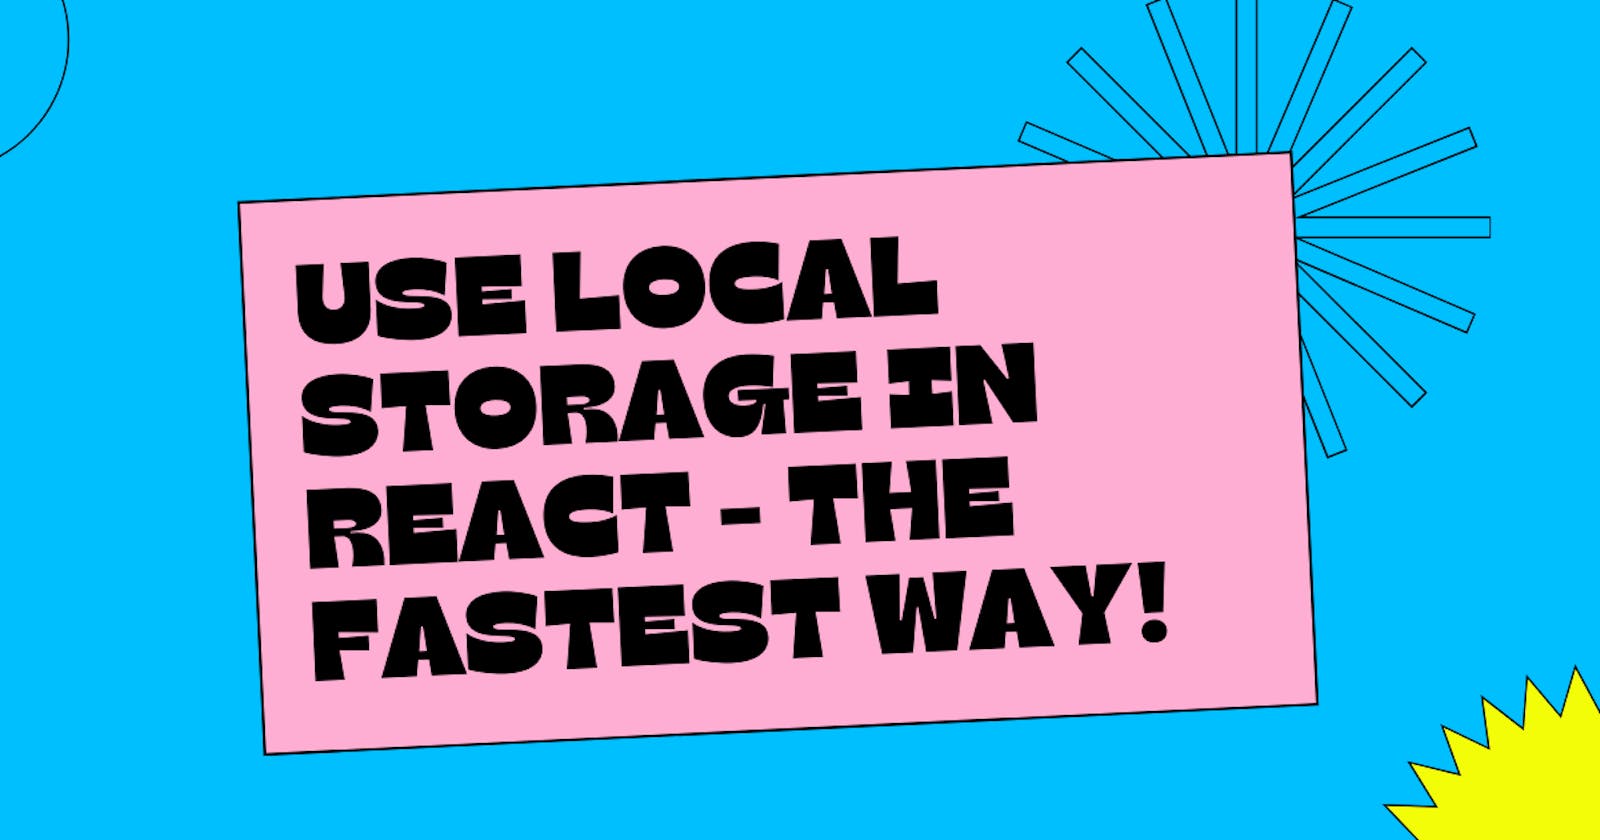 Use Local Storage in React - The fastest way! 🚀